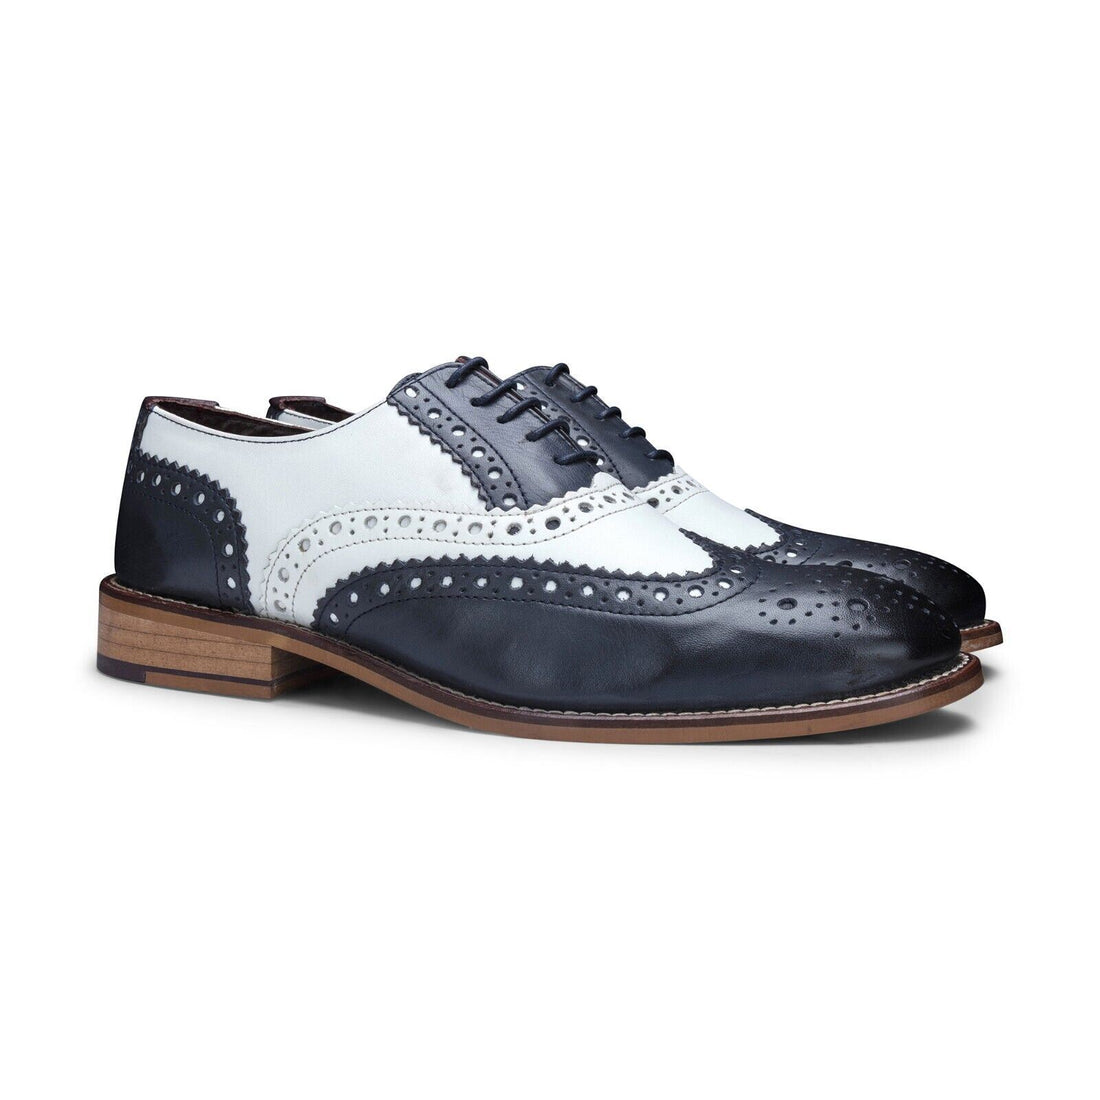 Mens Classic Oxford Navy/White Leather Gatsby Brogue Shoes - Upperclass Fashions 